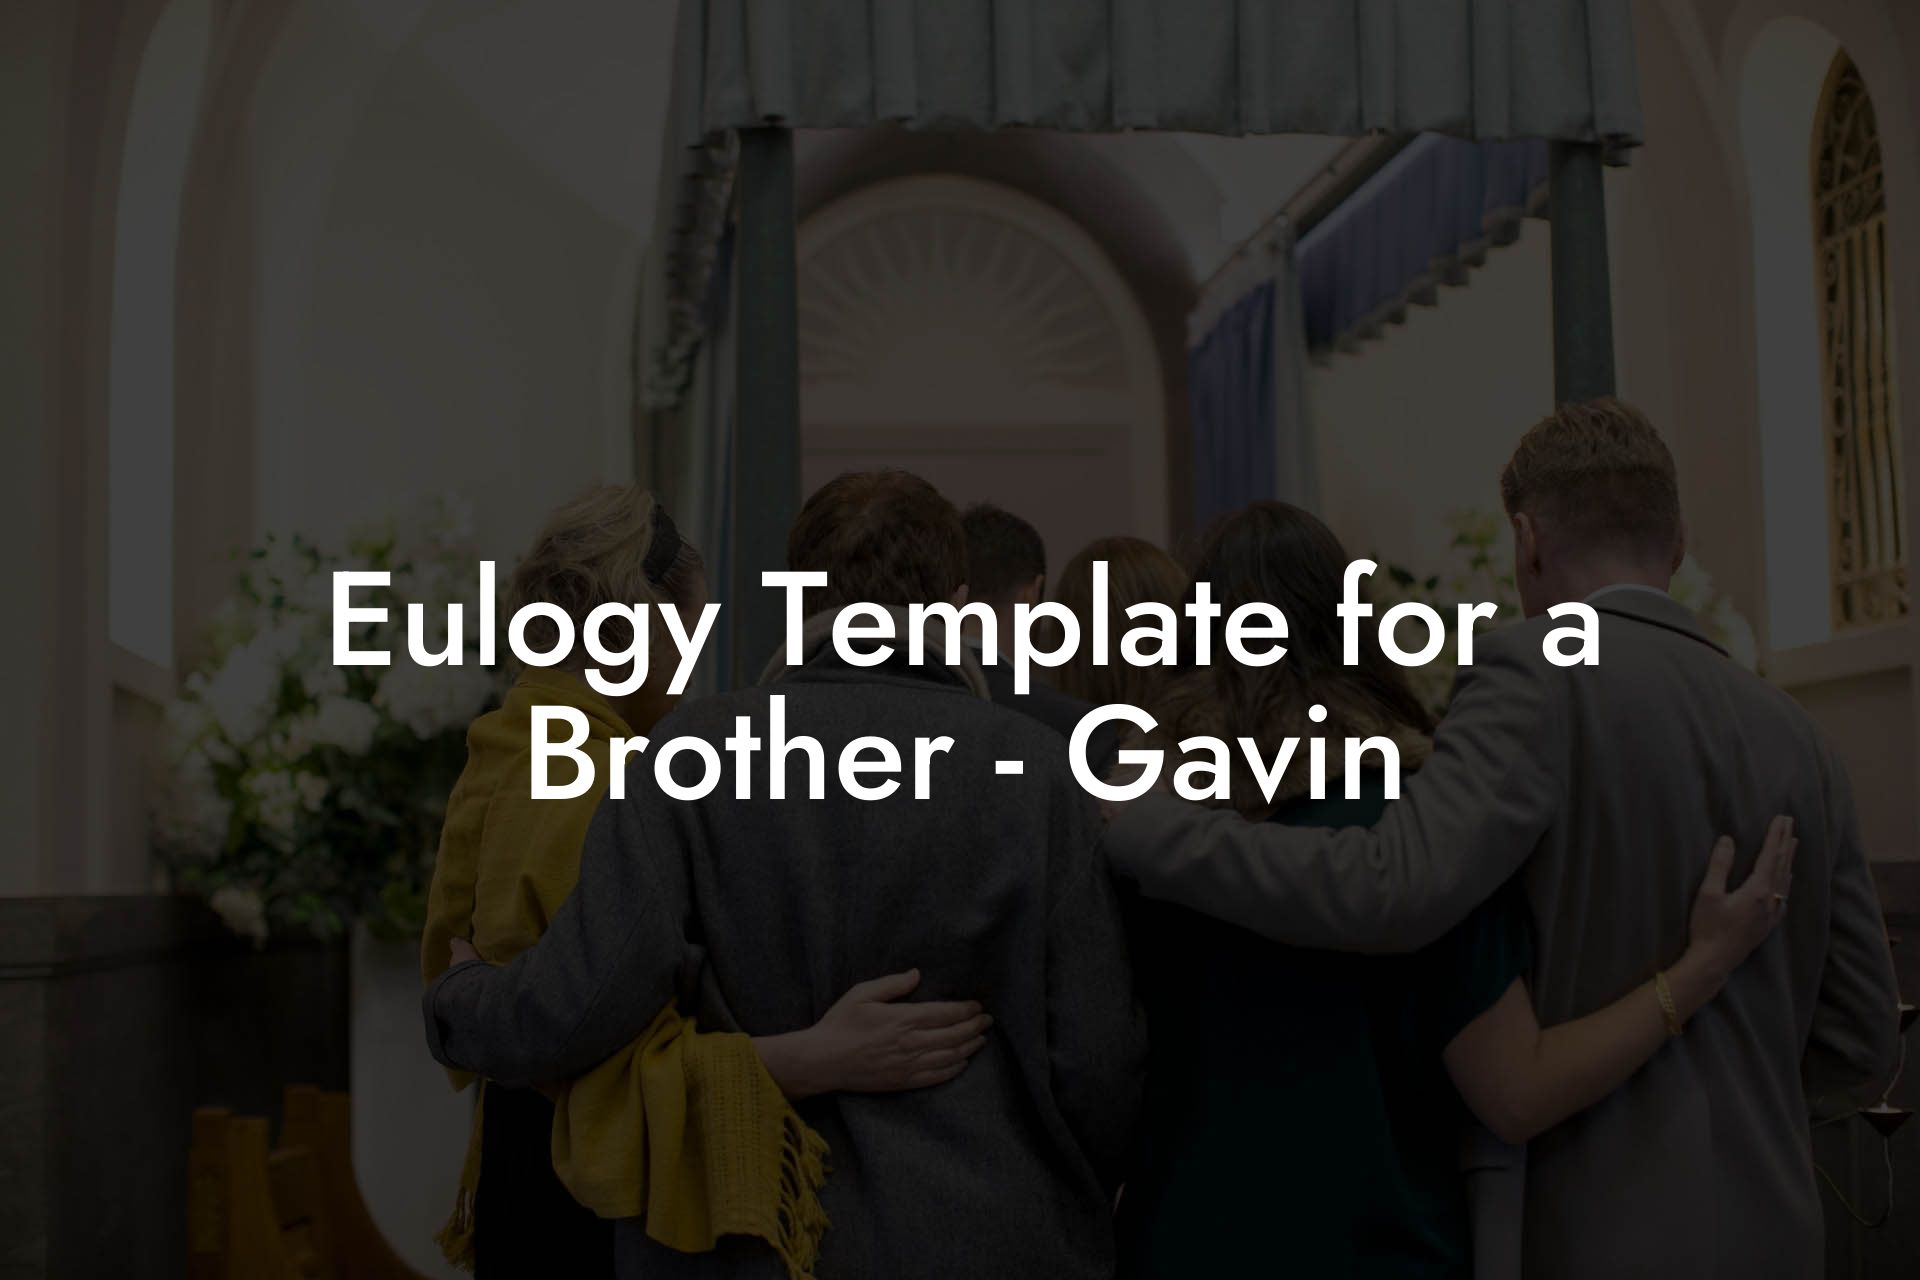 Eulogy Template for a Brother - Gavin